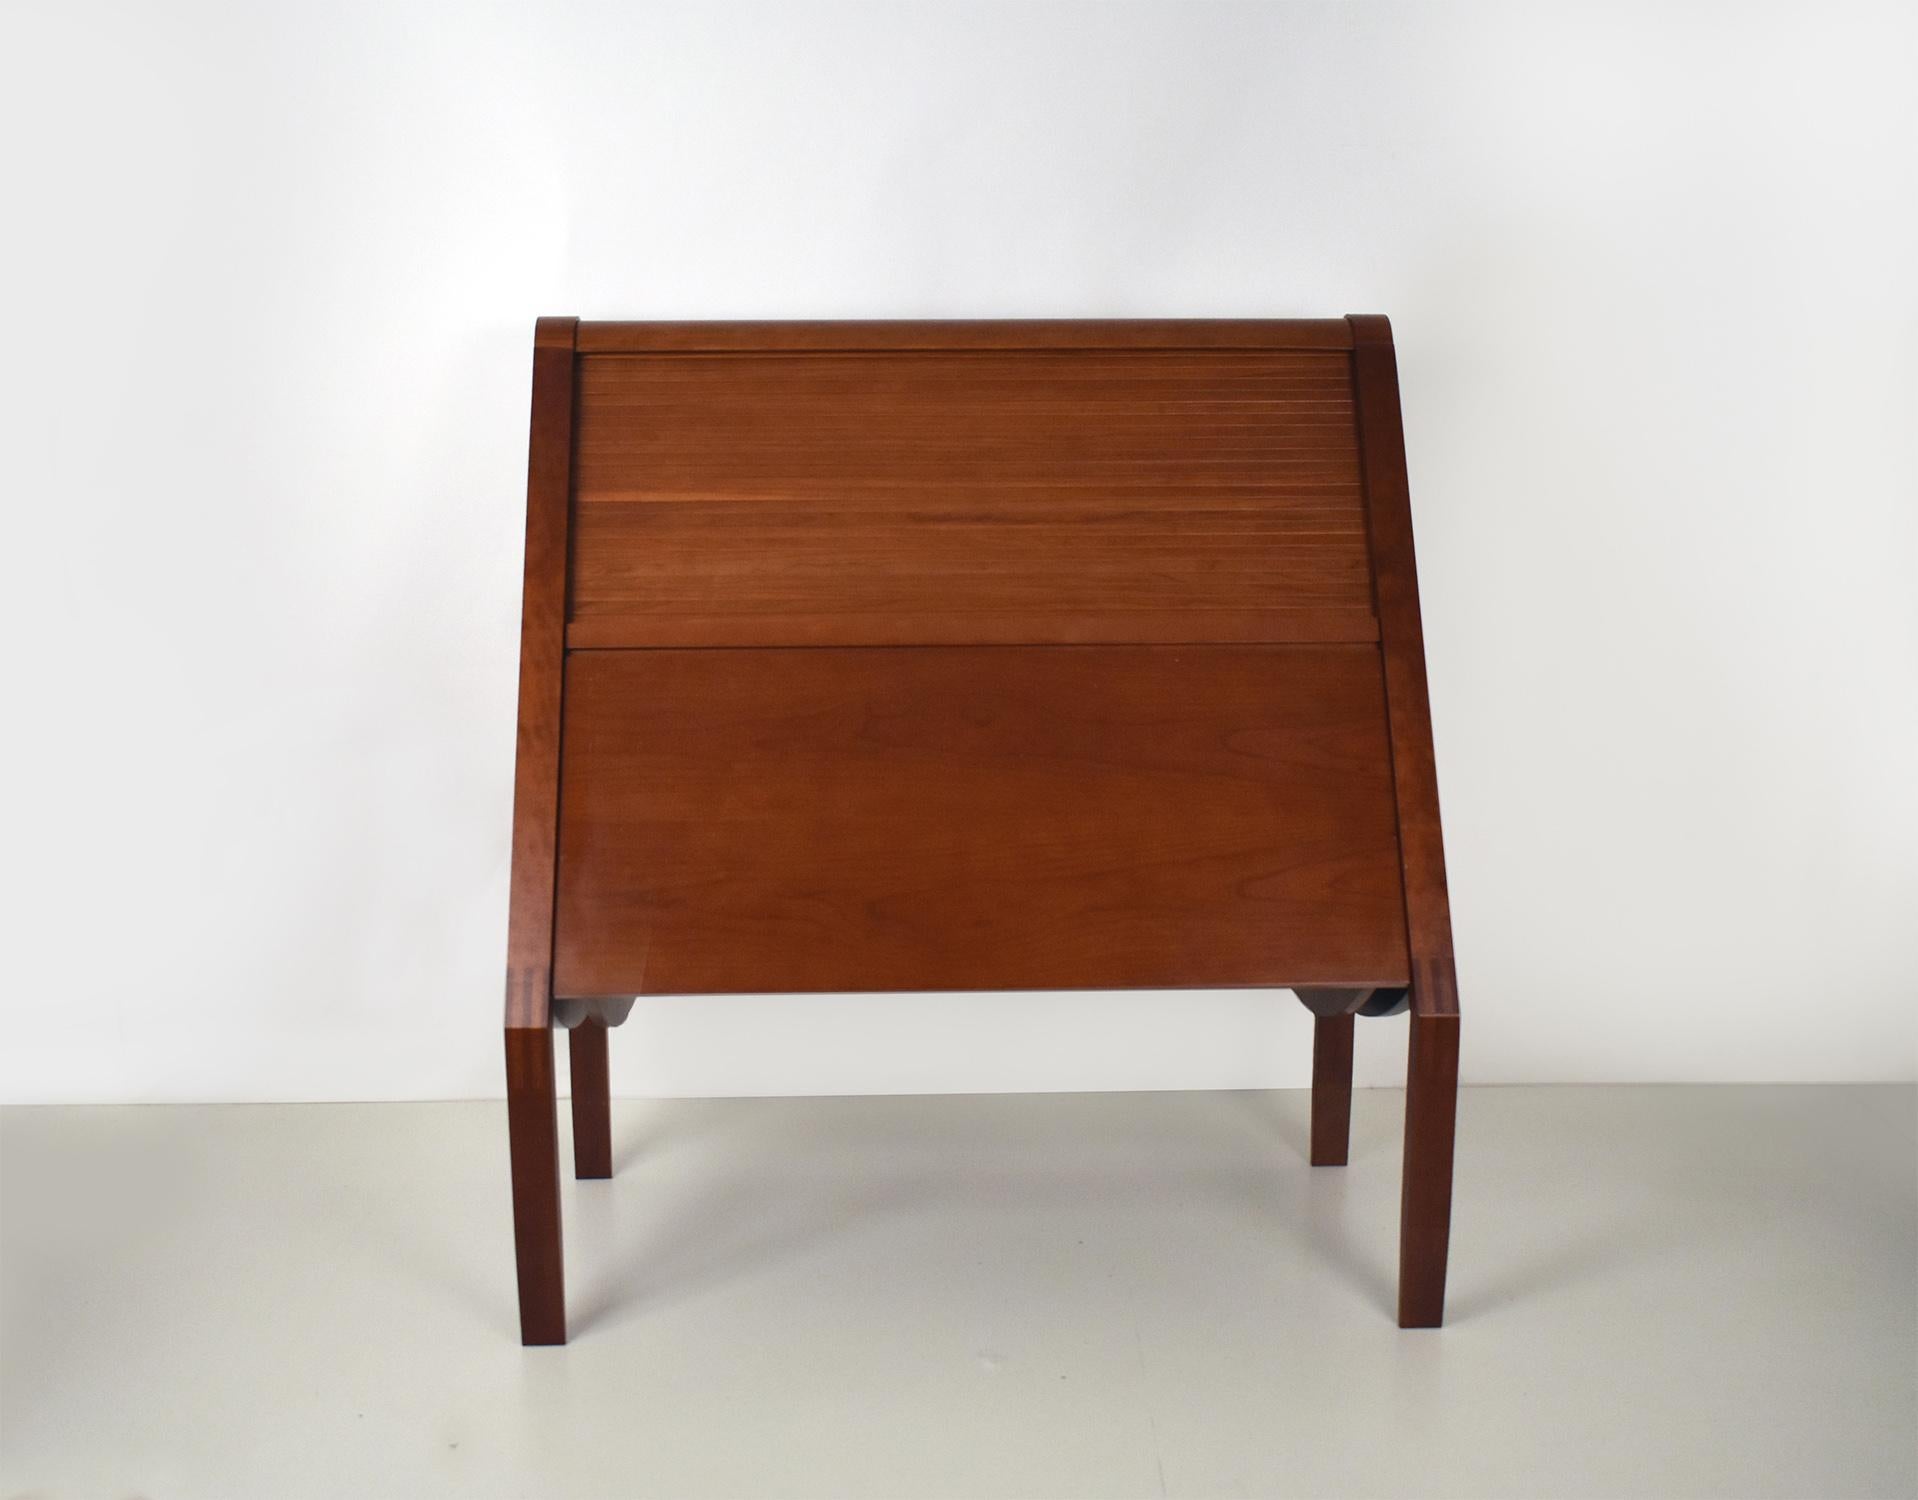 Late 20th Century Compass Writing Desk Bureau by Pedro Miralles Claver for Punt Mobles, circa 1990